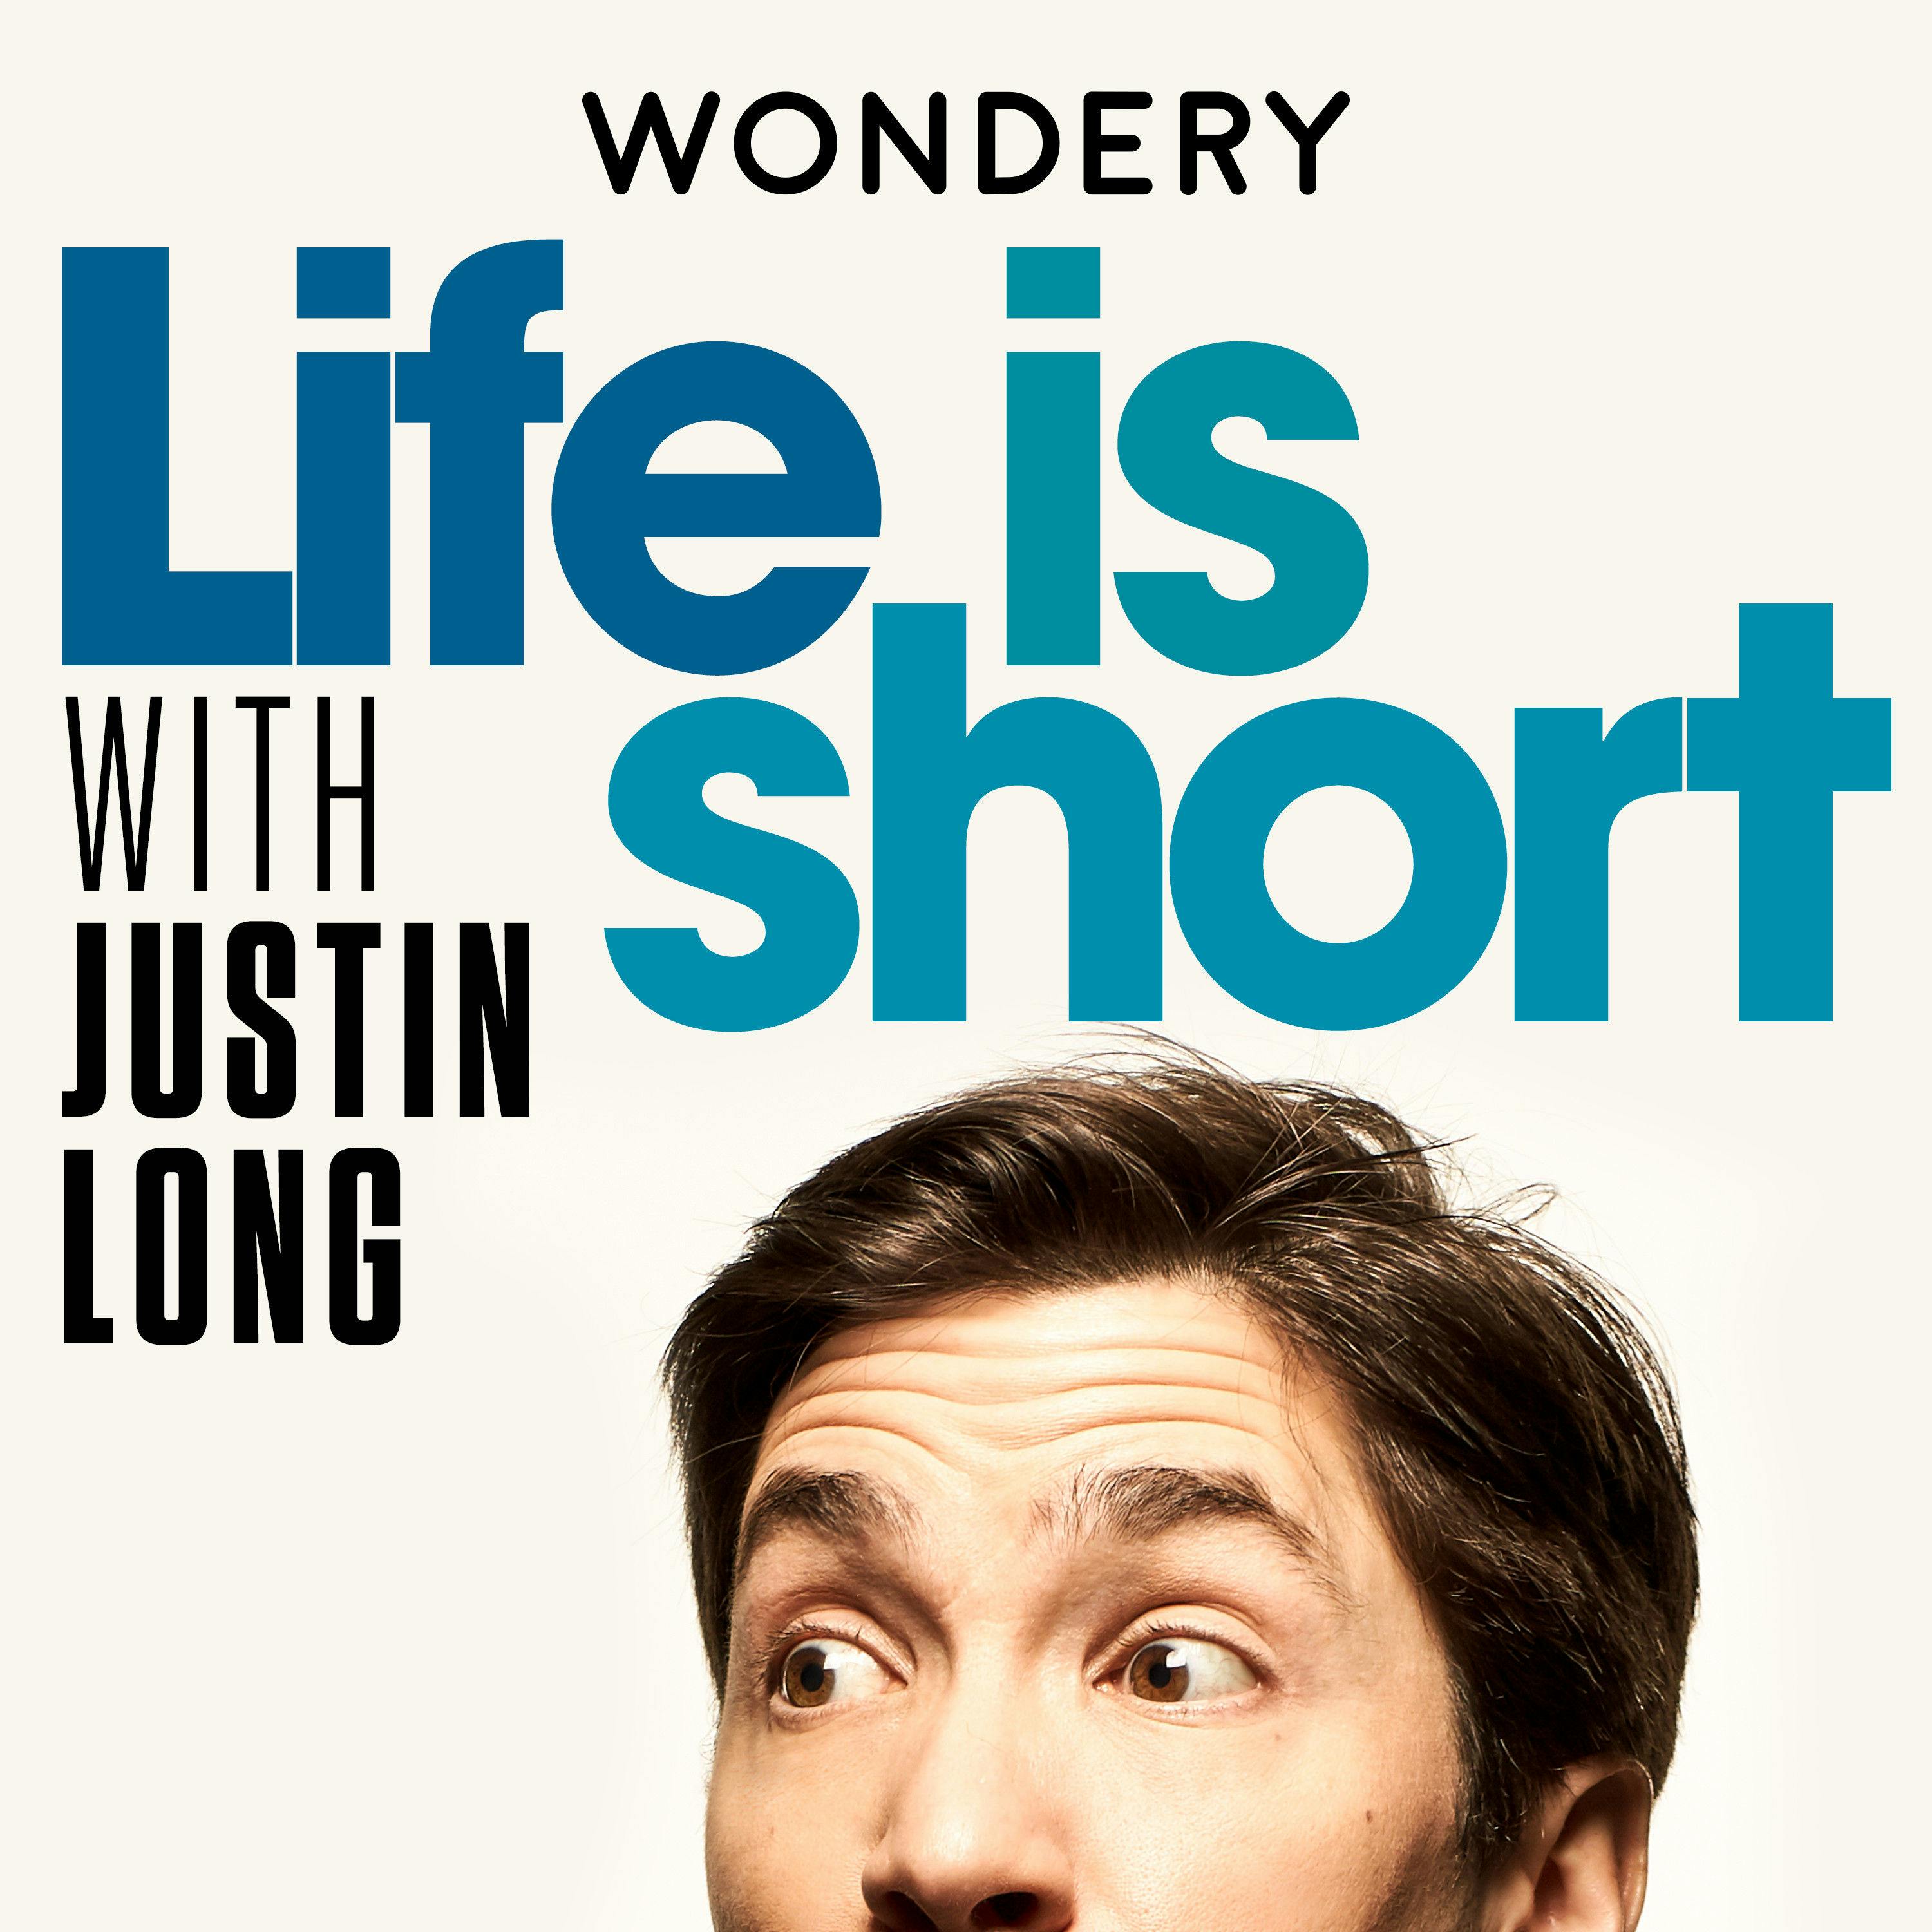 Life is Short with Justin Long